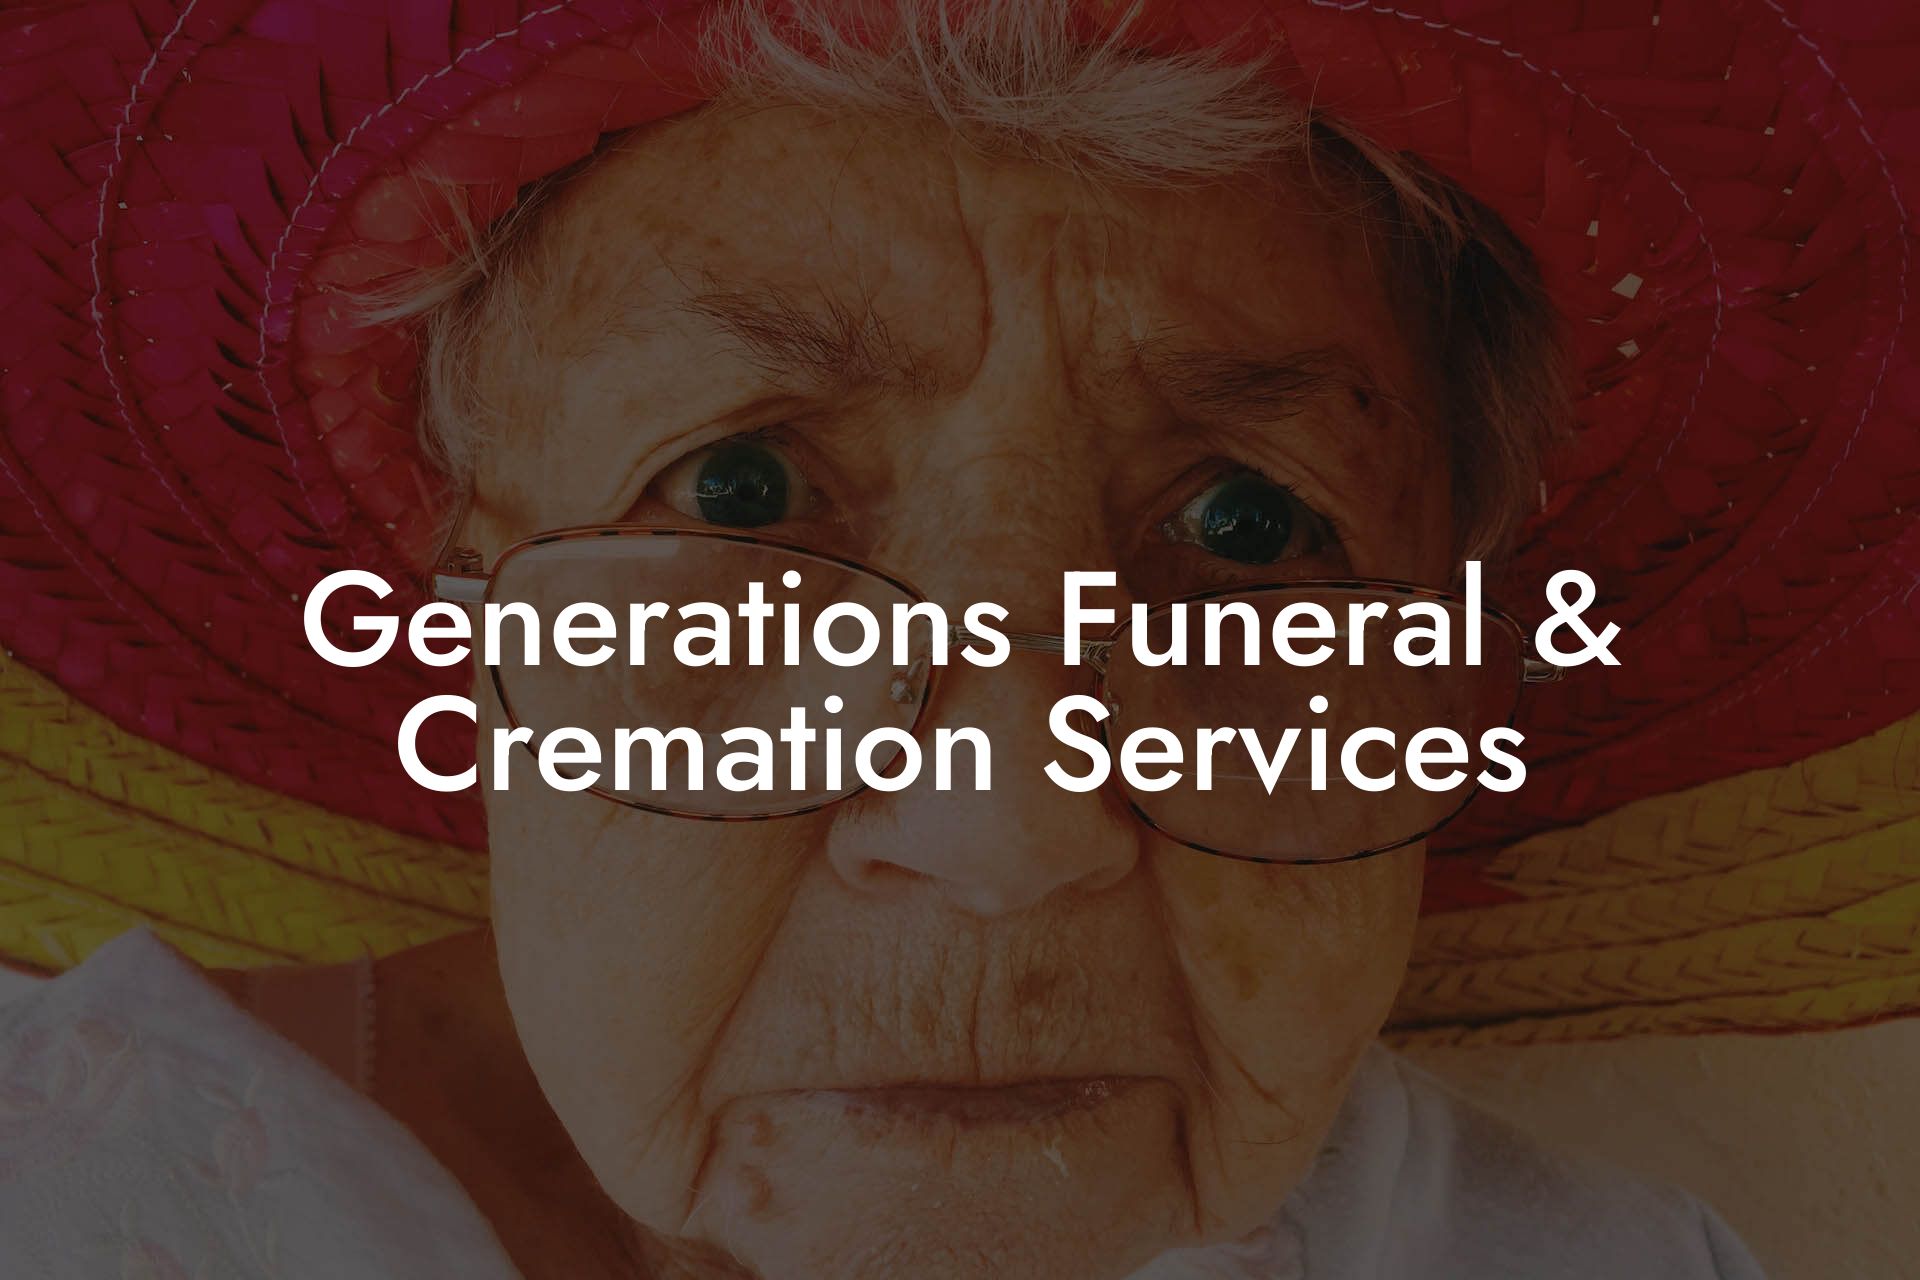 Generations Funeral & Cremation Services